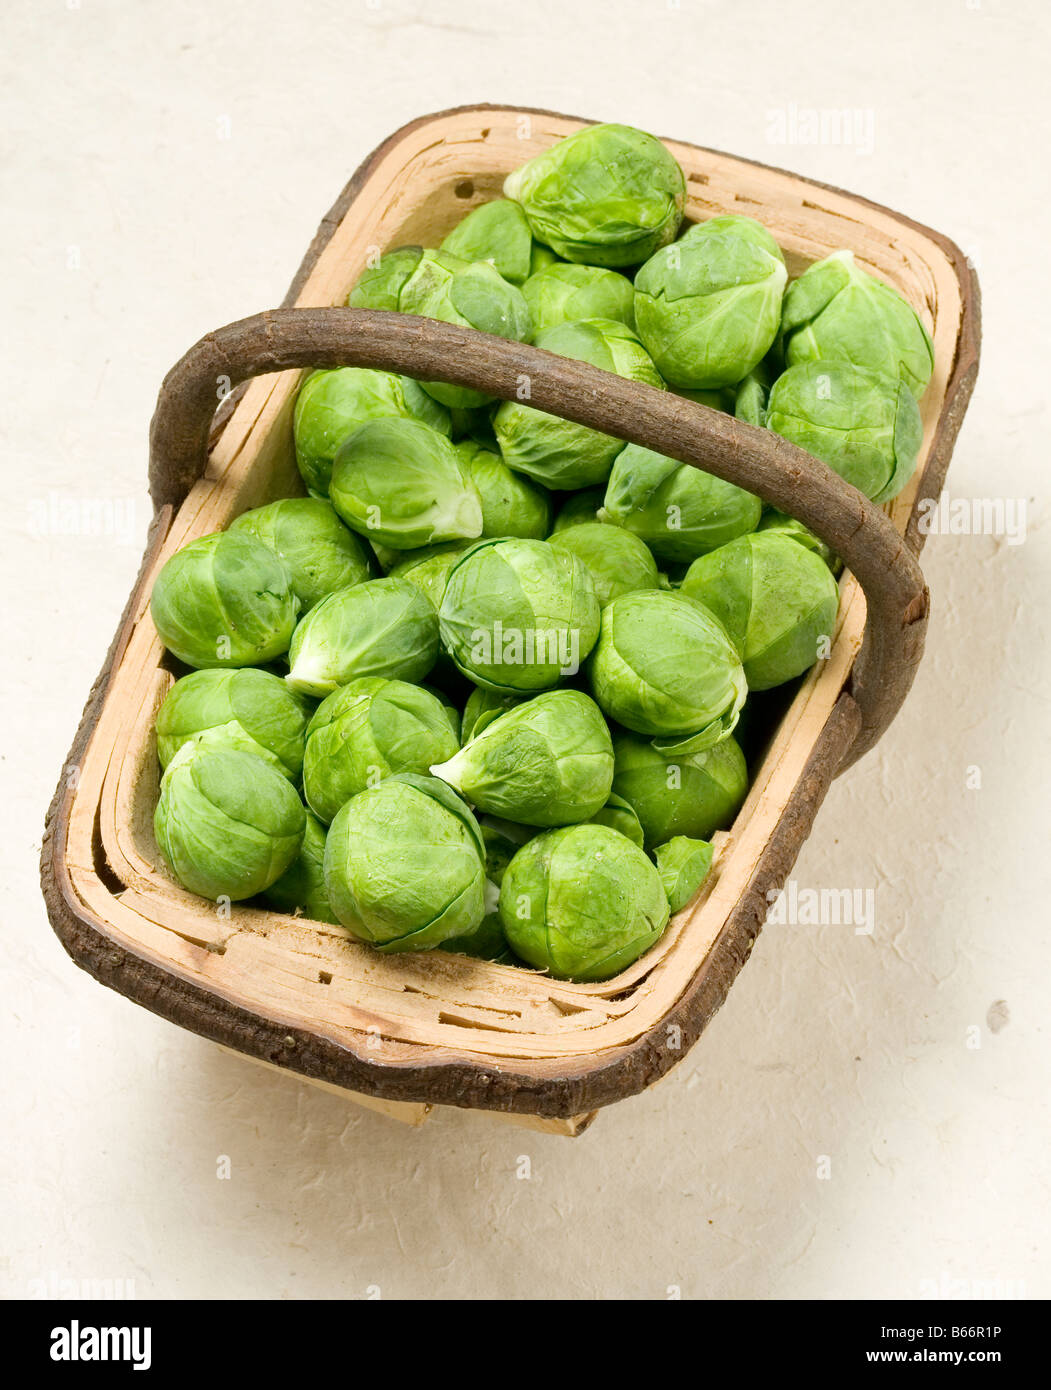 trug of fresh brussel sprouts Stock Photo